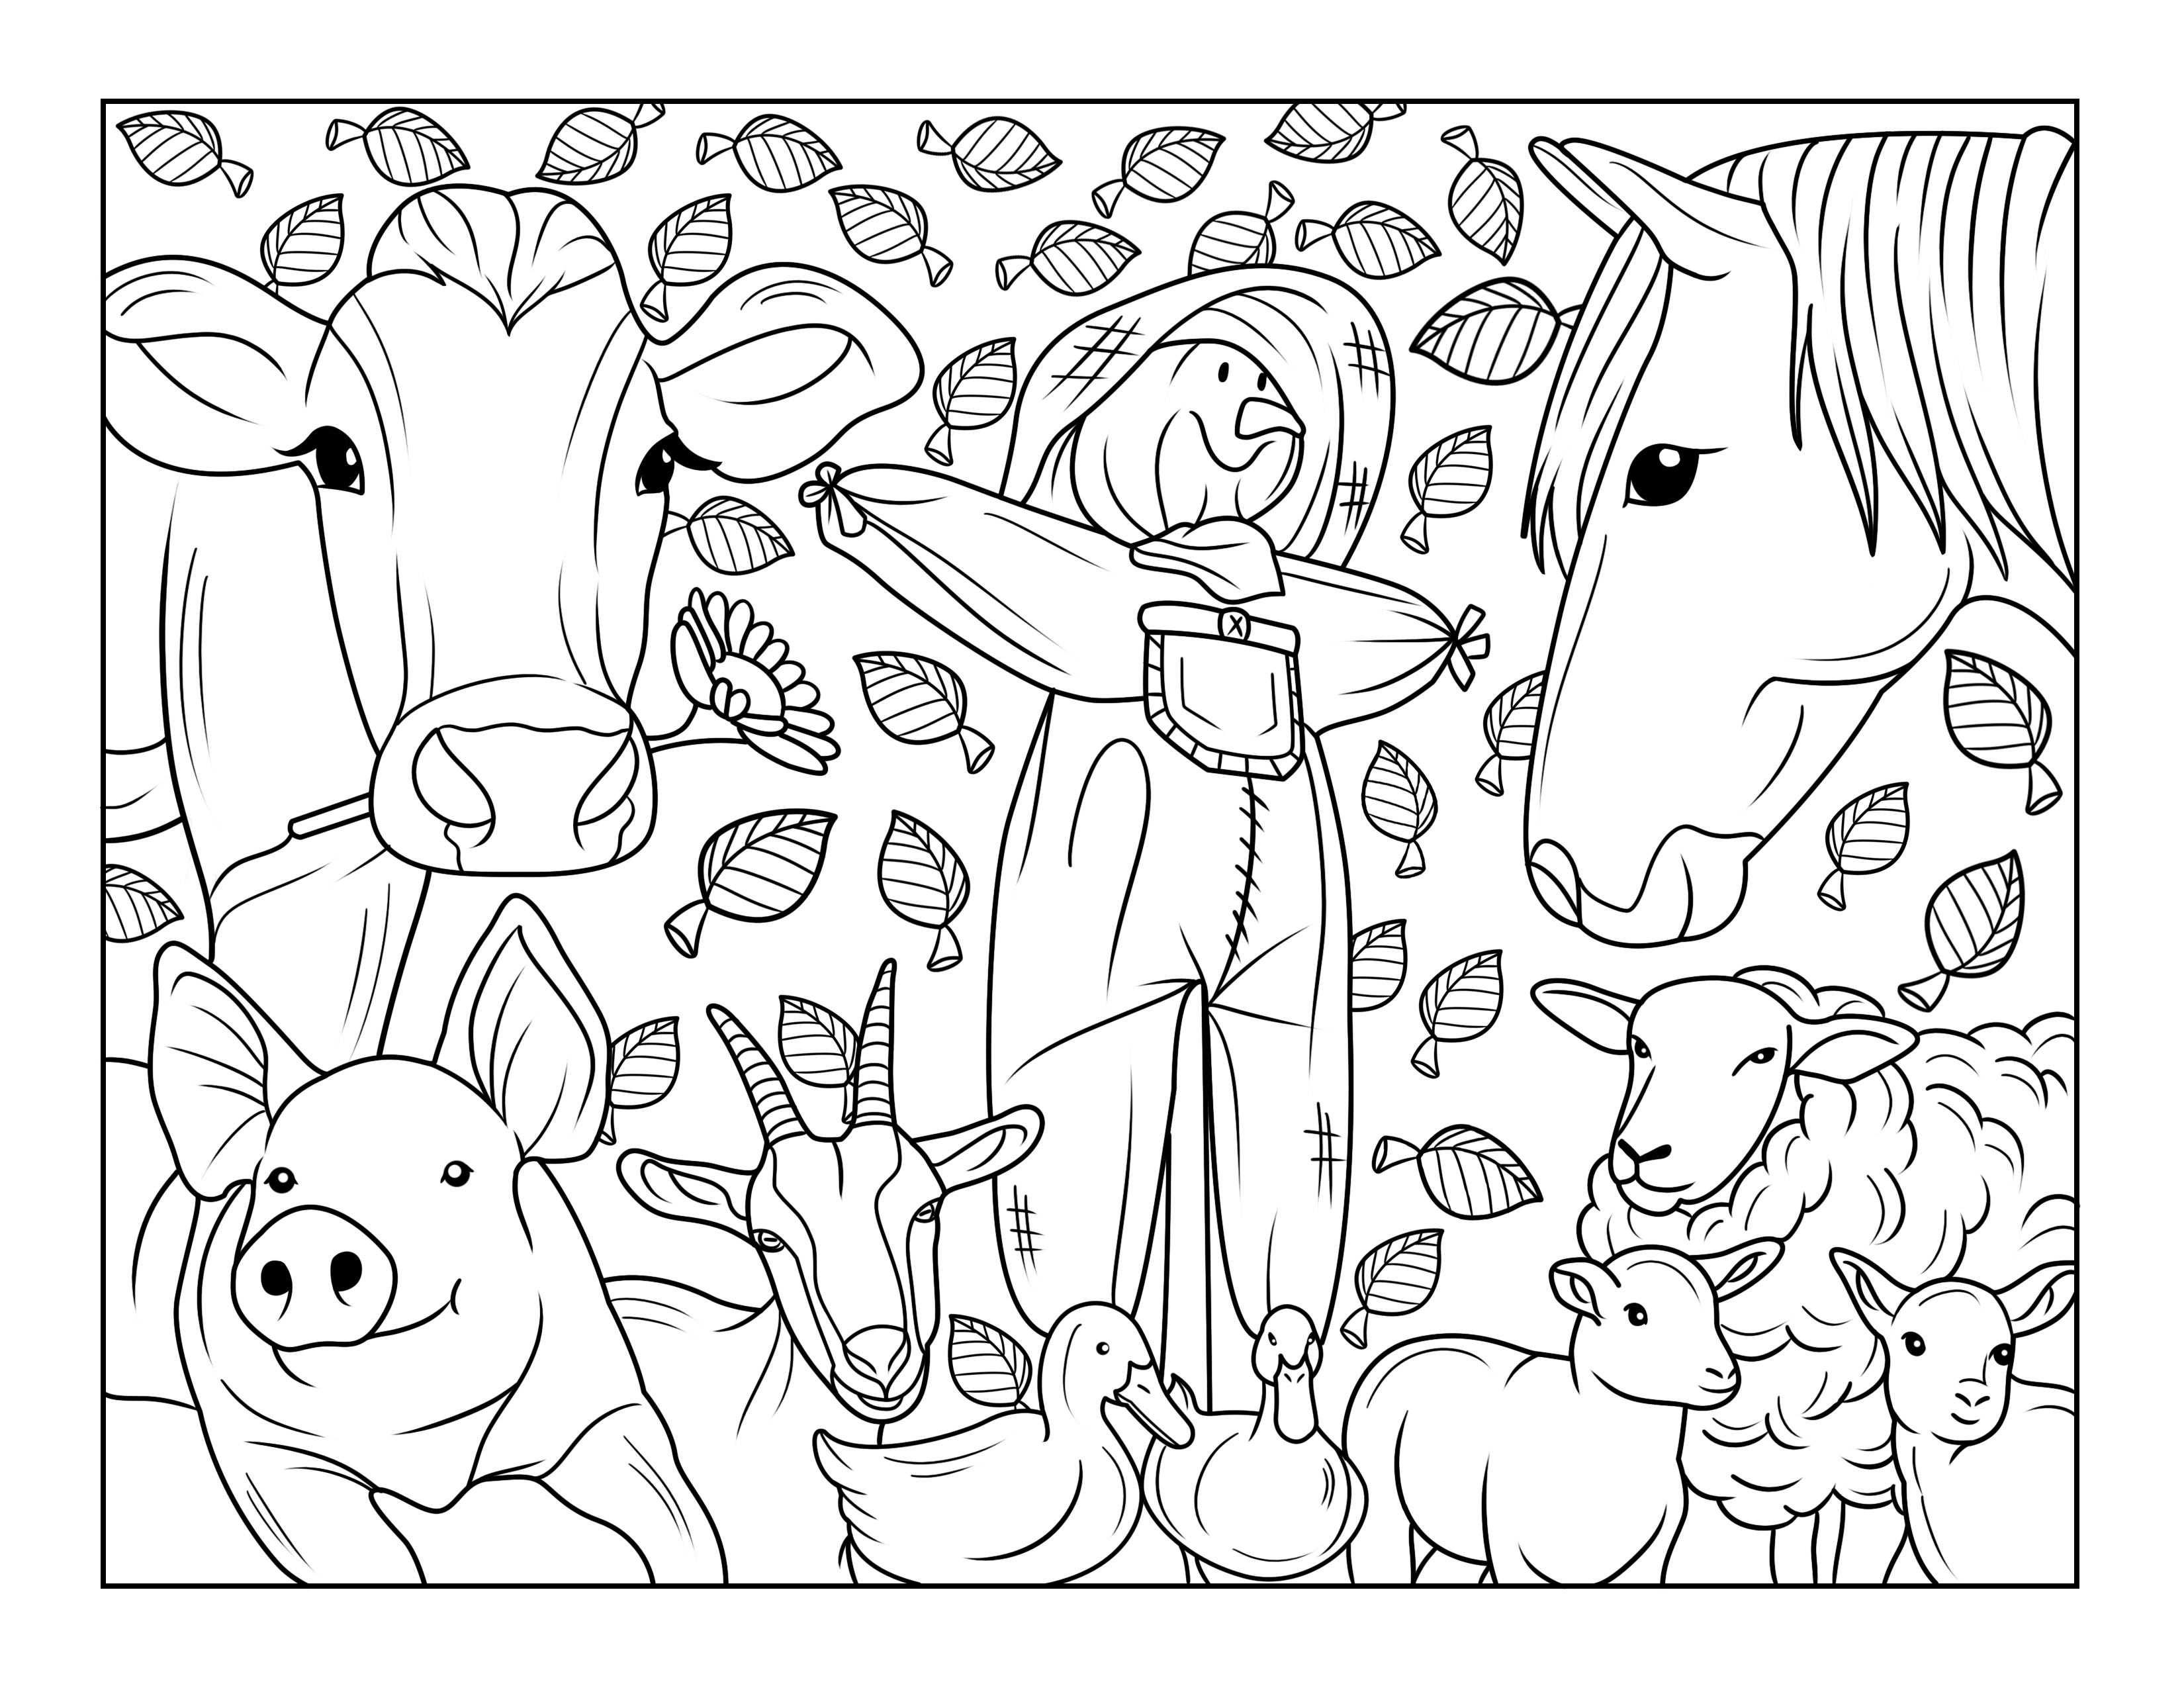 Coloring pages for november